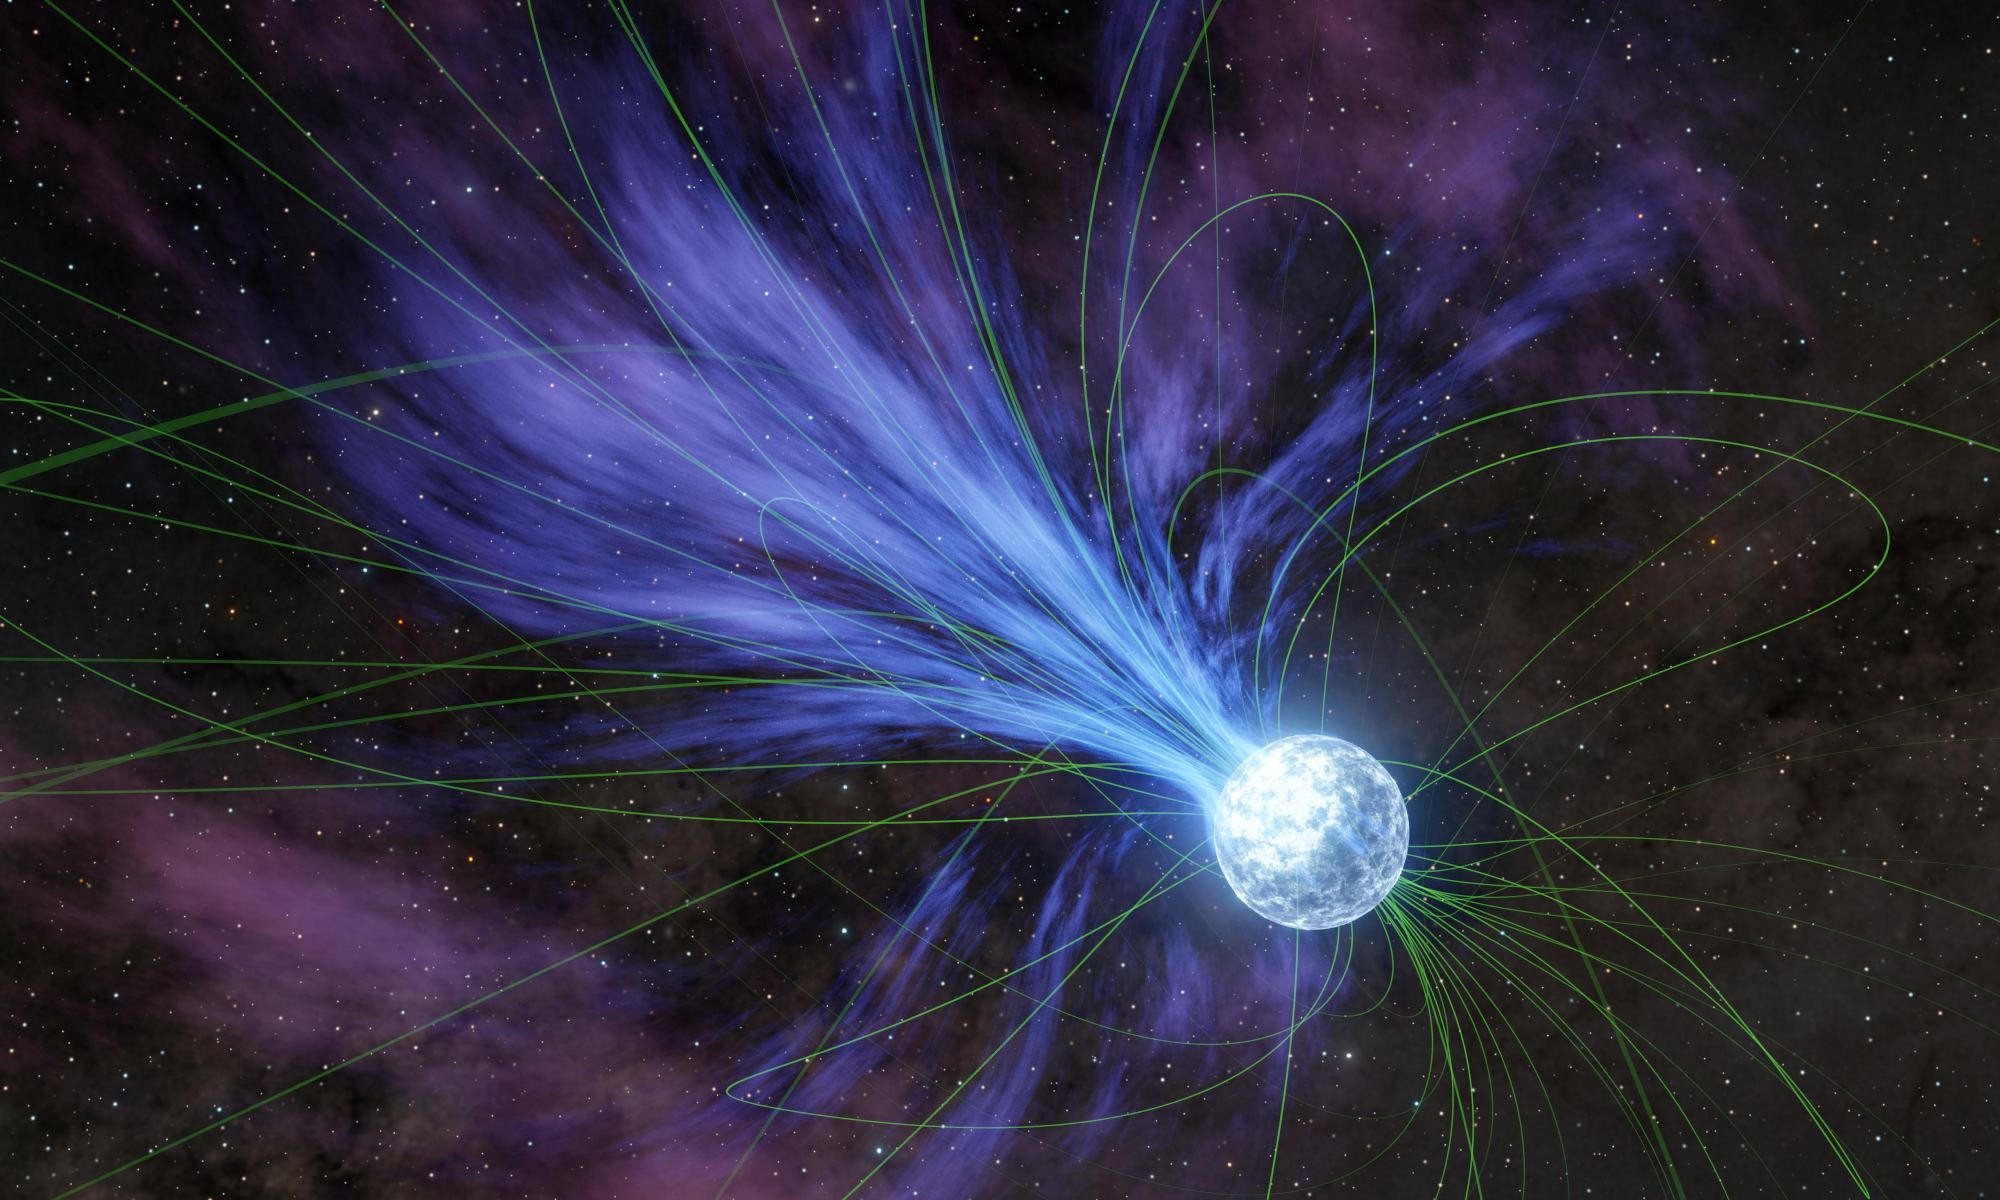 This magnetar is a highly magnetized neutron star. This artist's illustration shows an outburst from a magnetar. Neutron stars that spin rapidly and give out radiation are called pulsars, and specific pulsars are rare in the core of the Milky Way. Credit: NASA/JPL-CalTech